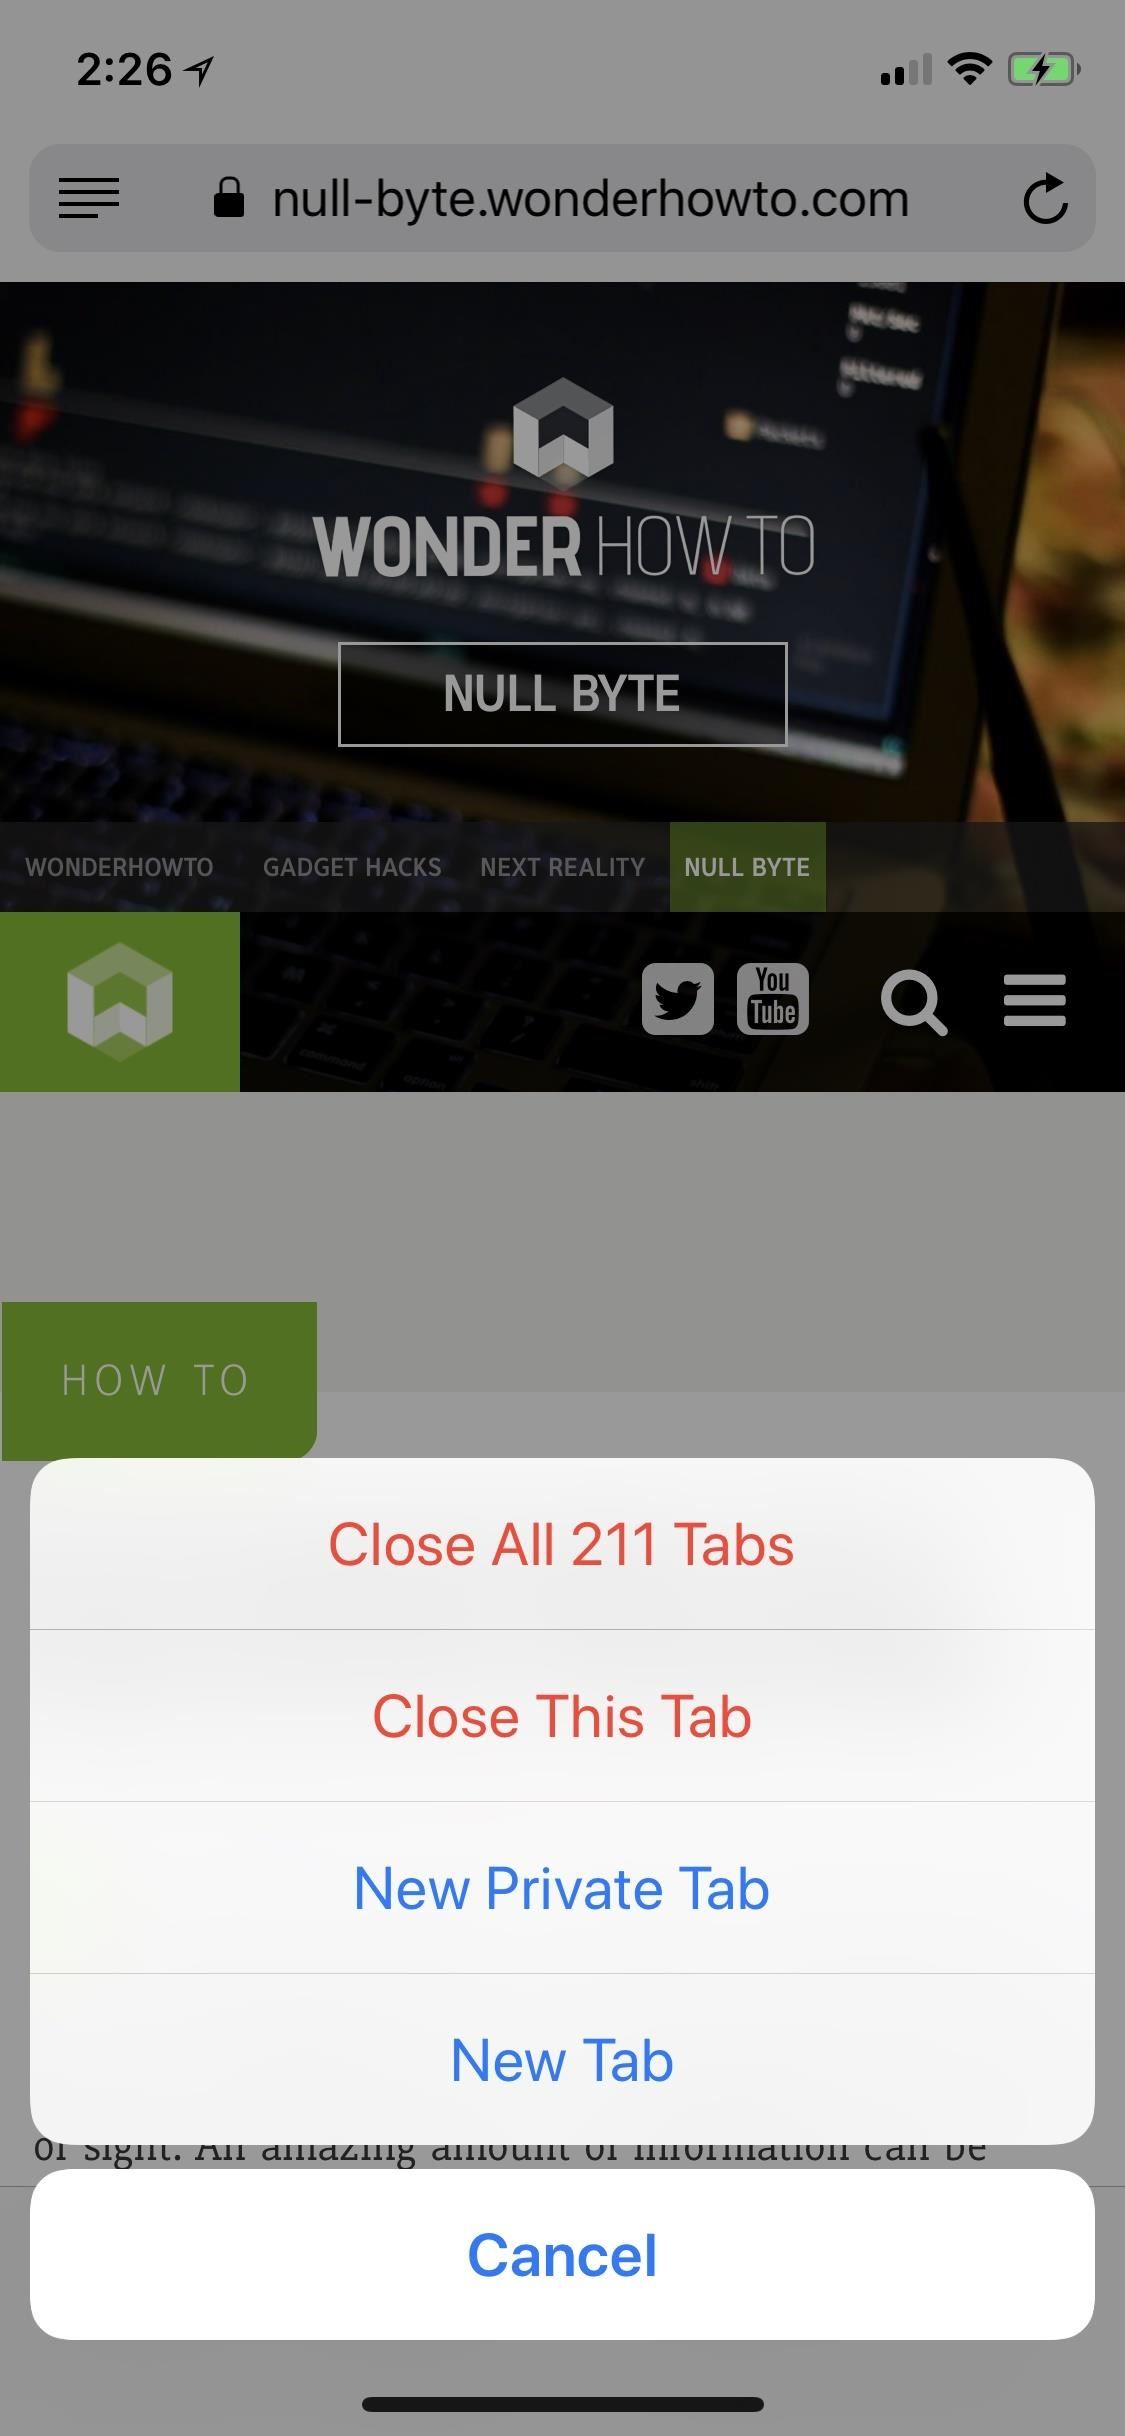 Safari 101: How to Close All Your Open Tabs at the Same Time